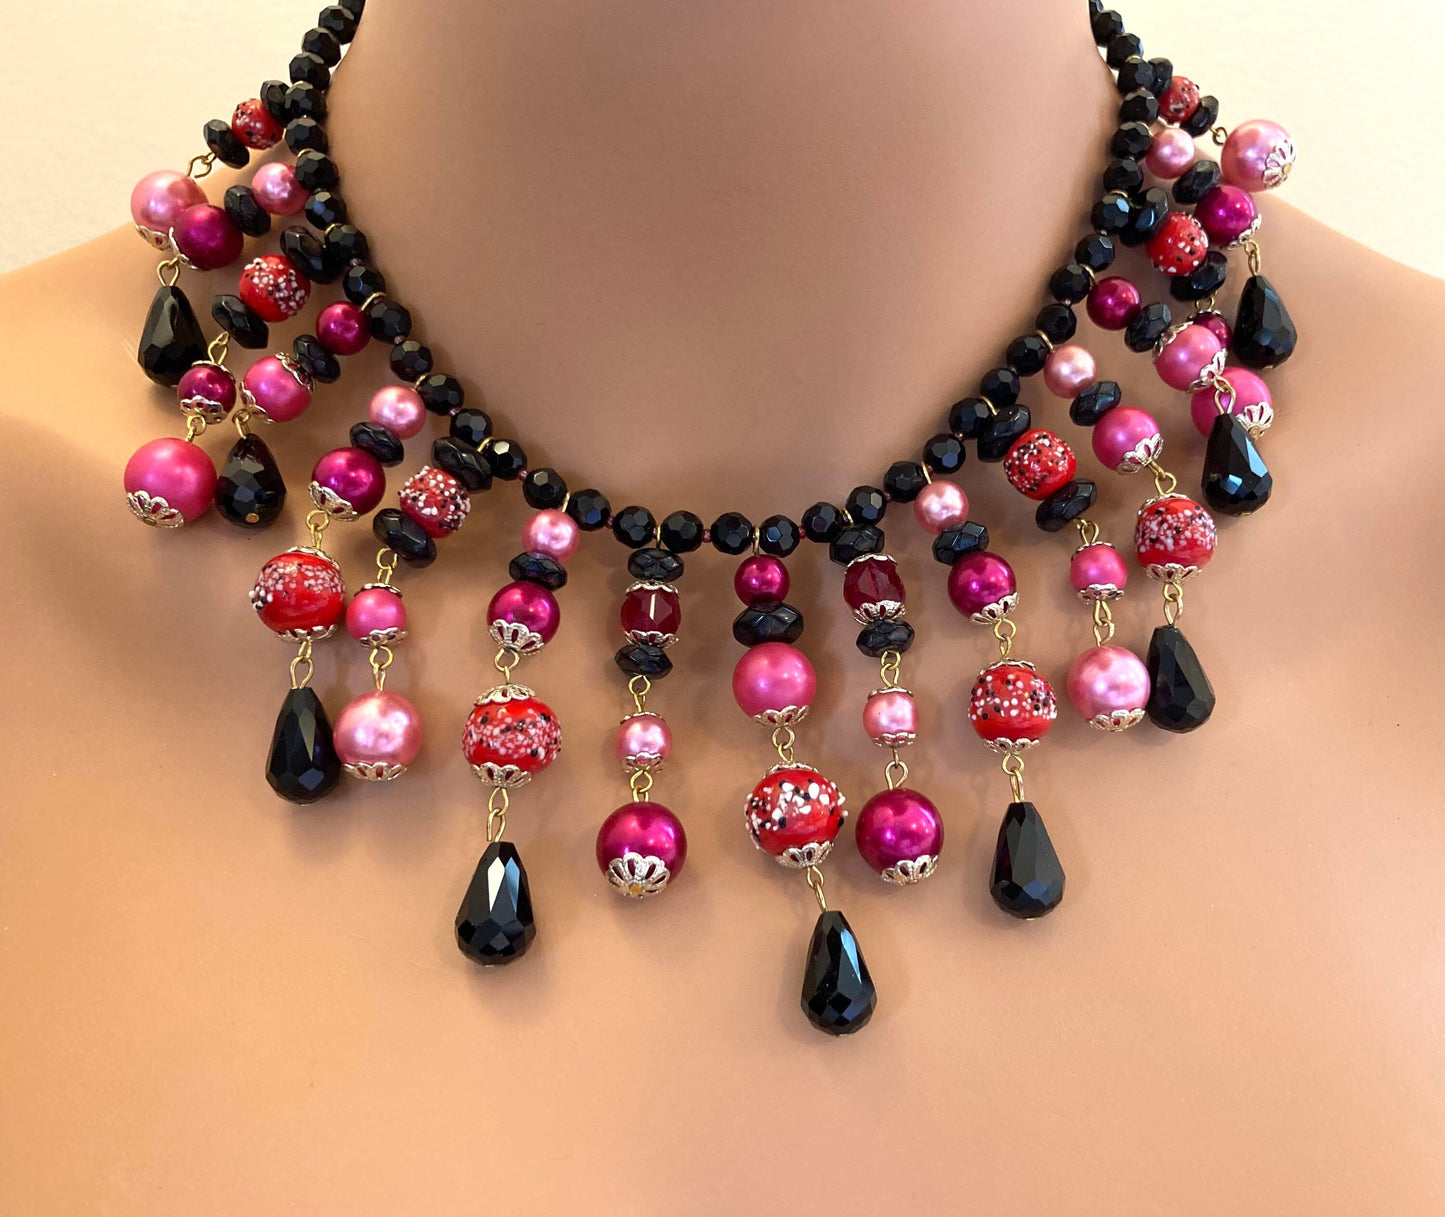 Fringe Necklace Set in Black and Pink bib necklace with vintage beads in hot pink red and black in a fringe collar style. Earrings included